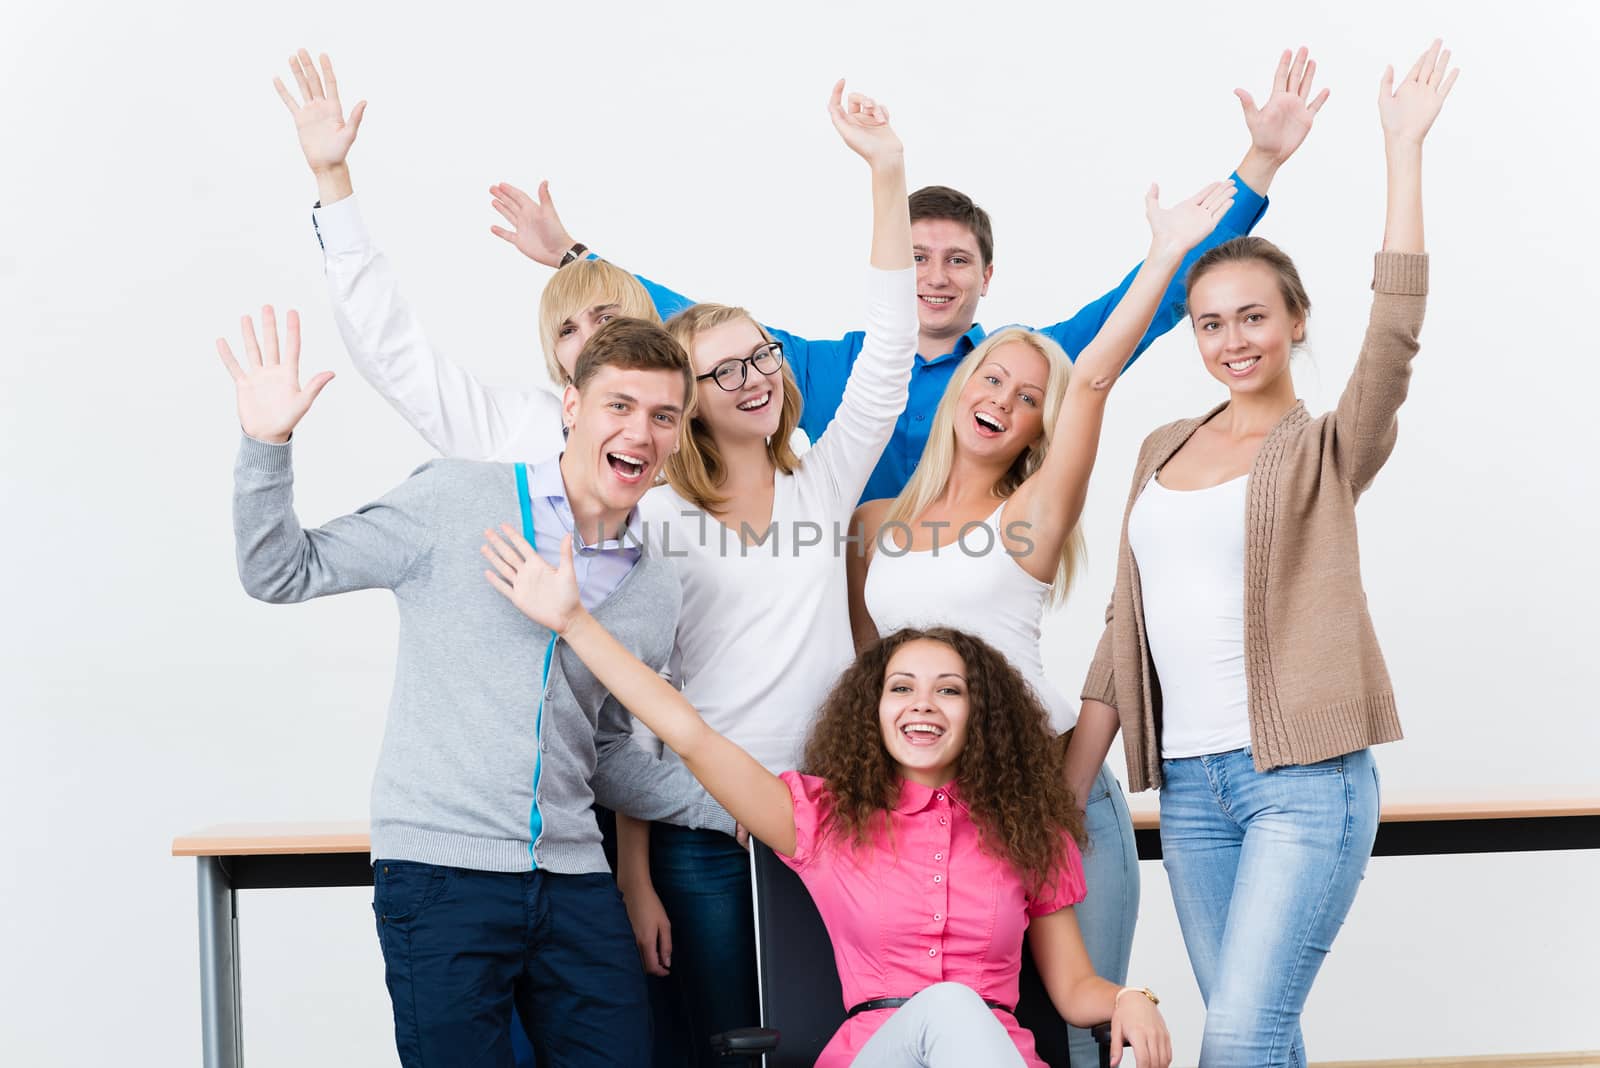 University students in the class raised their hands and having fun